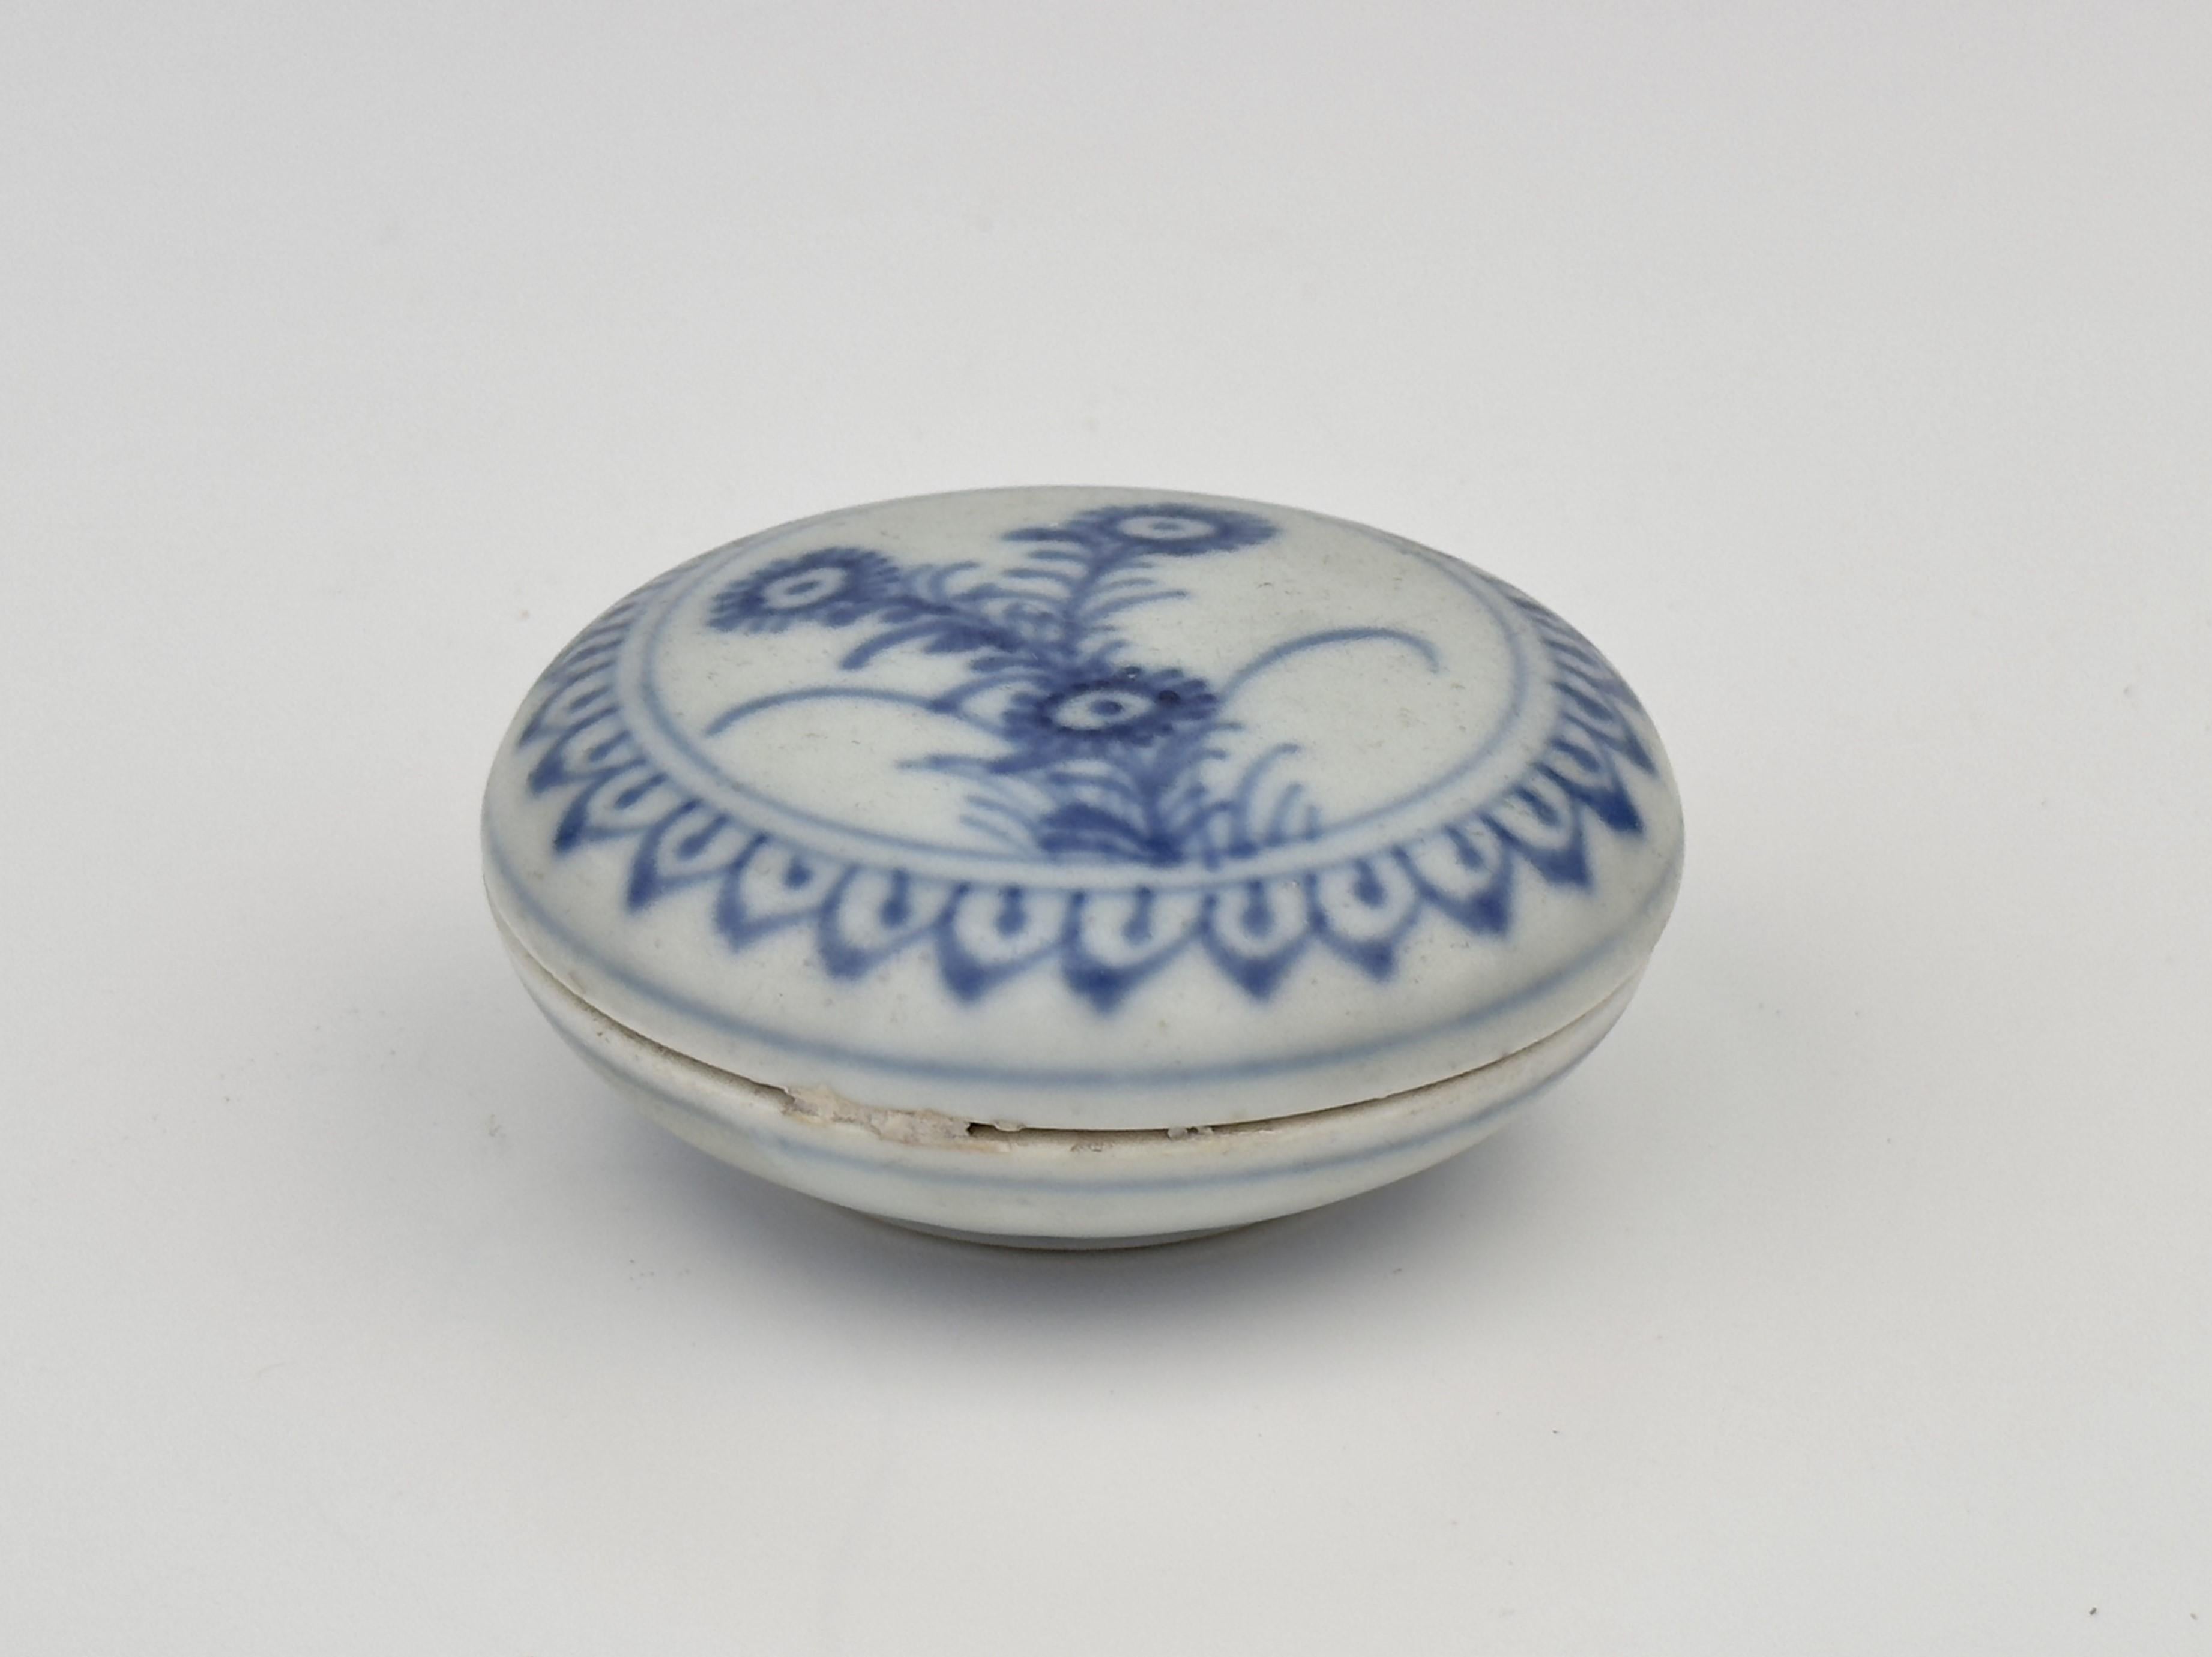 Circular form with flattened doomed cover, the covers with a medallion of simple stylised flowers, the bowls with stylised lappet borders.

Period : Qing Dynasty, Yongzheng Period
Production Date : C 1725
Made in : Jingdezhen
Destination :